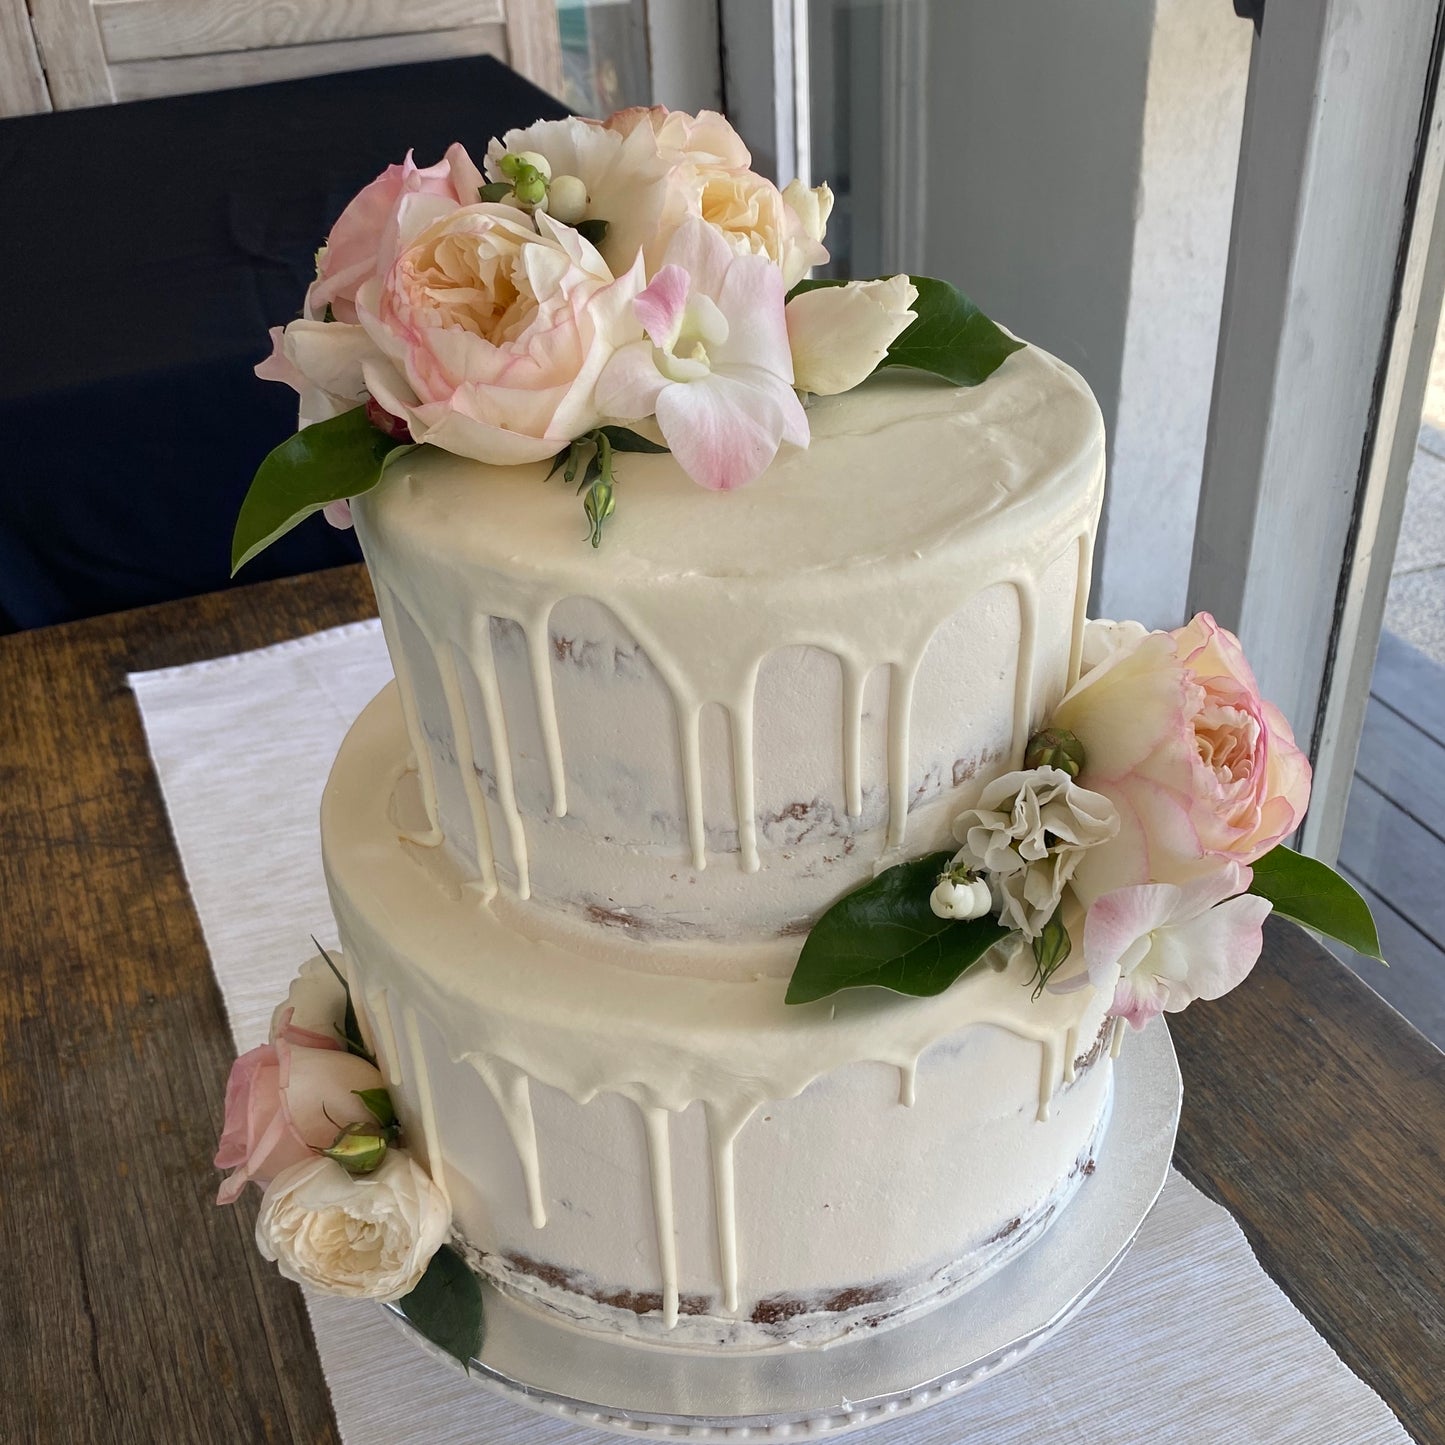 2 Tier Semi Naked With Drizzle & Pink Flowers